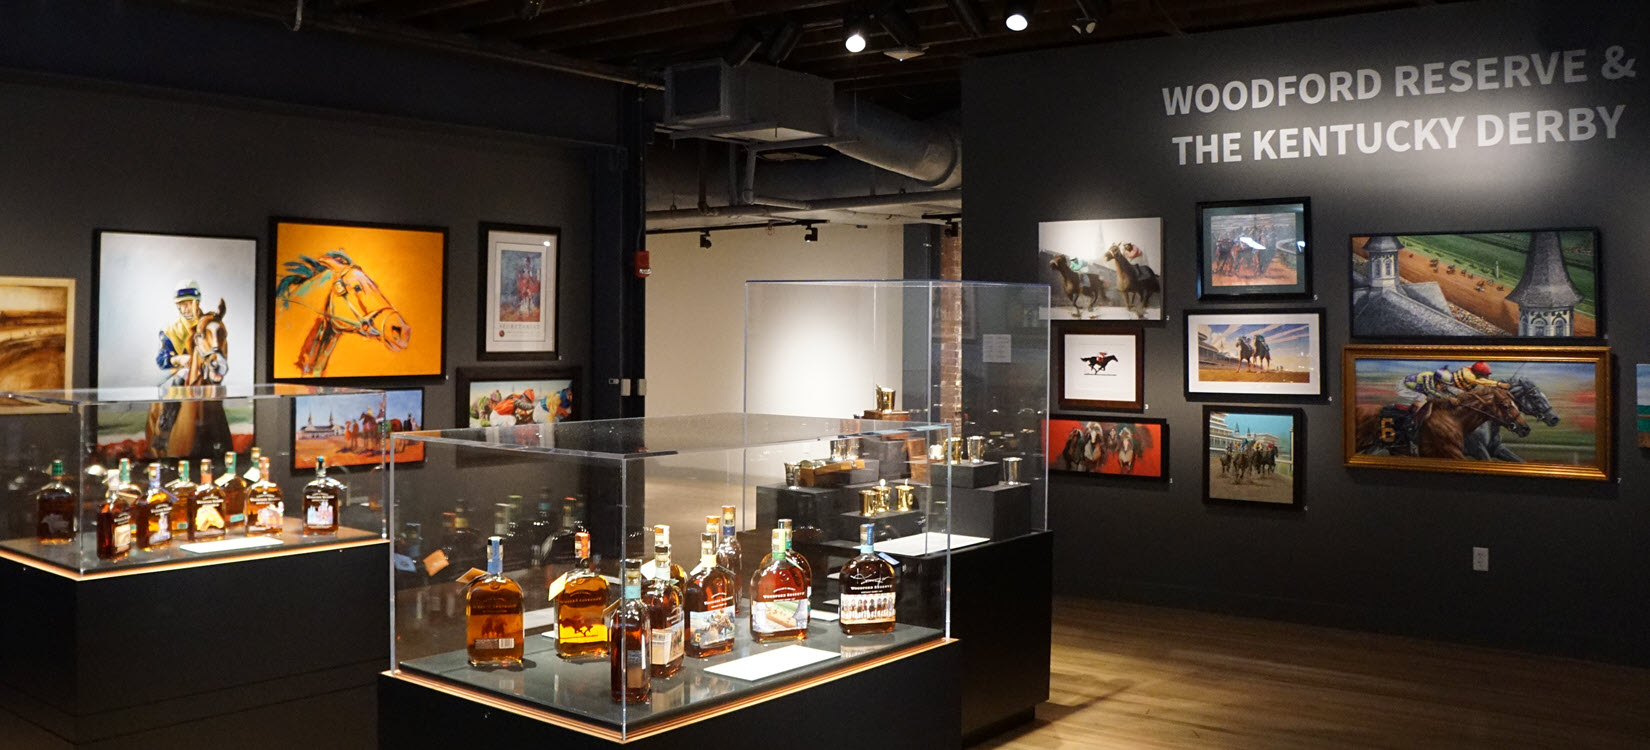 Woodford Reserve Distillery - Woodford Reserve at the Kentucky Derby Exhibit at the Frazier History Museum